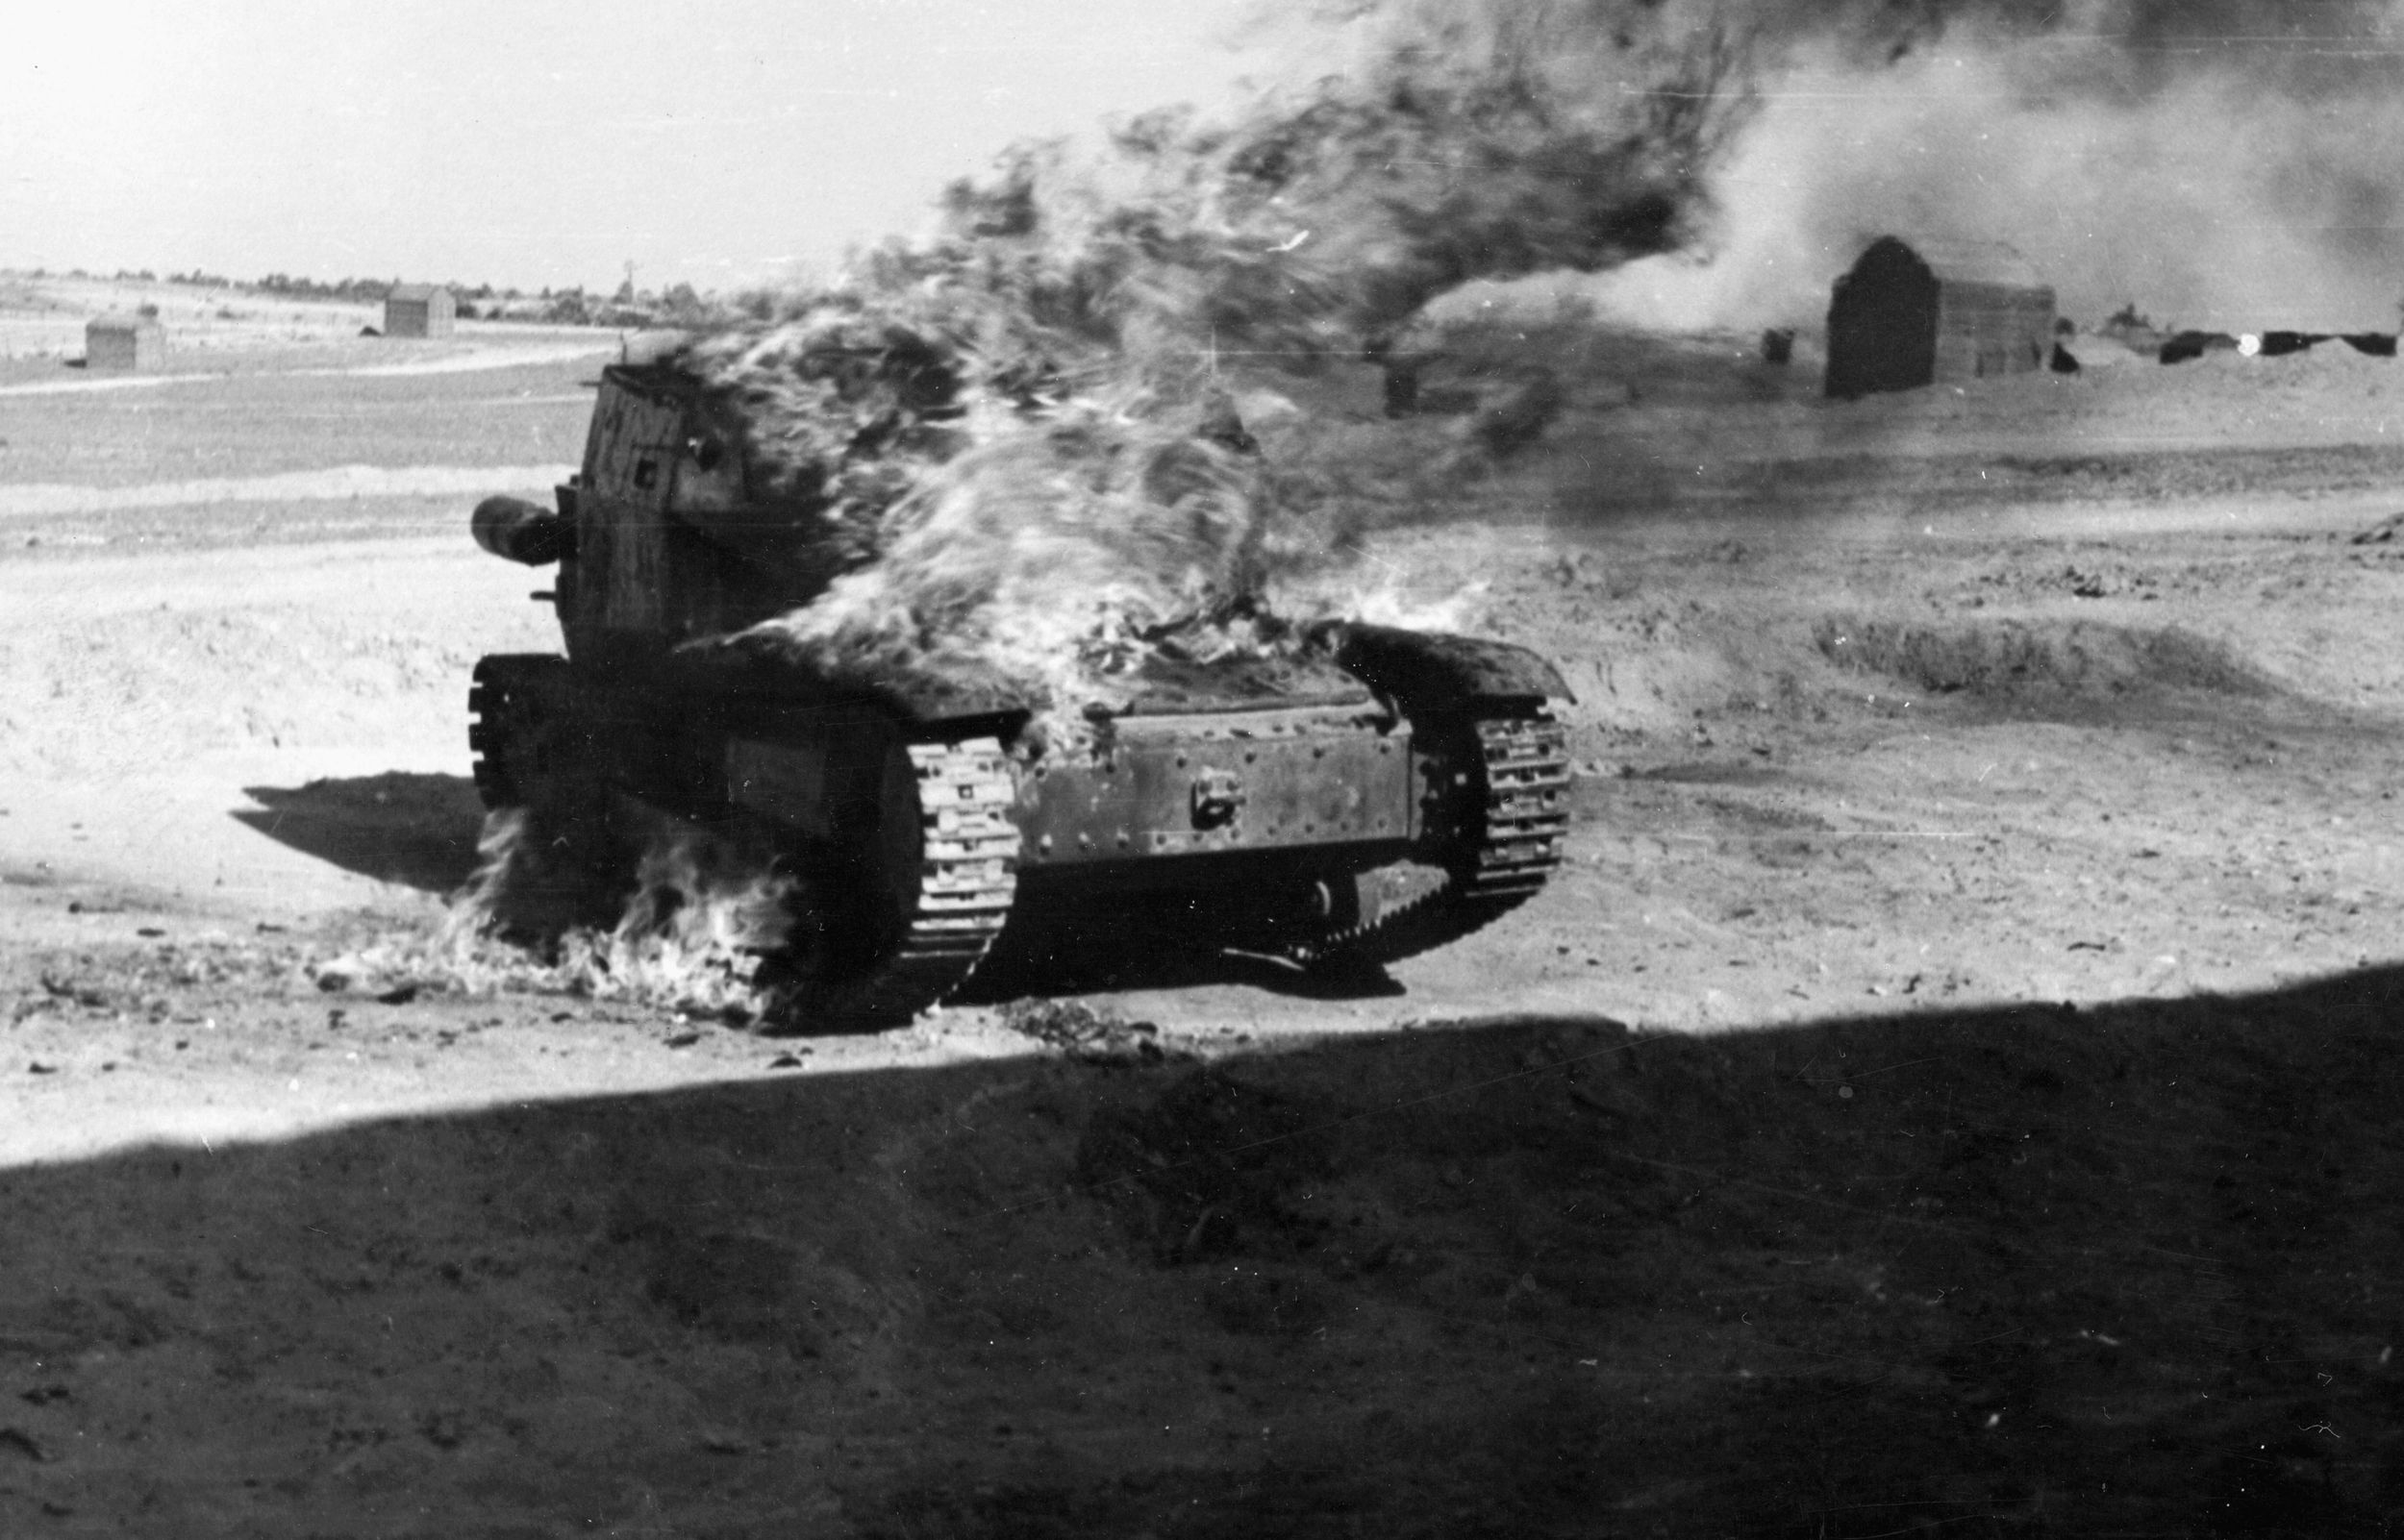 A burning German tank marks the line of retreat from El Alamein. During his preparations for the decisive battle, British Field Marshal Bernard Montgomery made certain that he had numerical superiority.